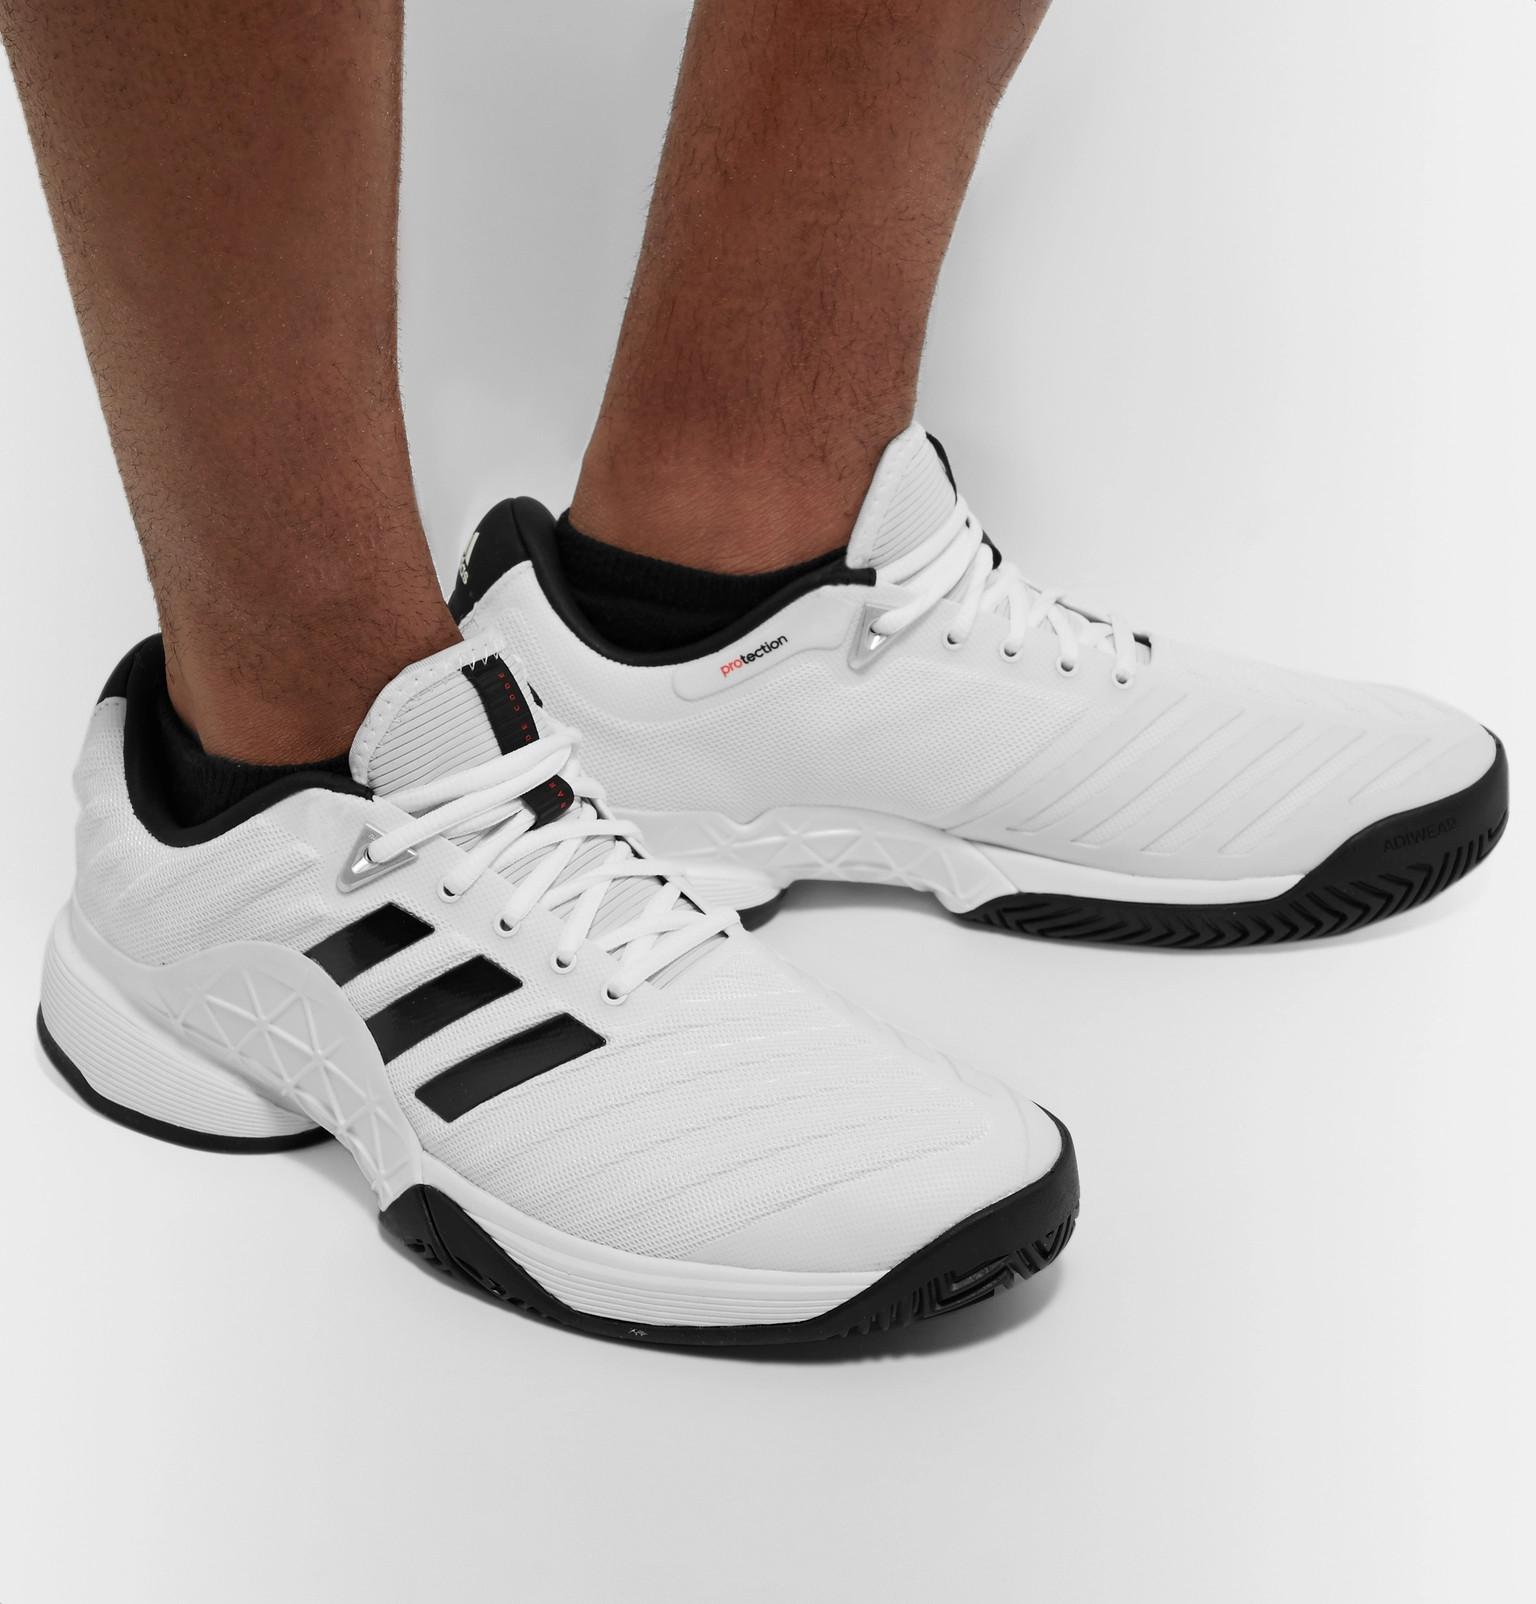 adidas Originals Barricade 2018 Rubber-trimmed Mesh Tennis Sneakers in White for Men - Lyst